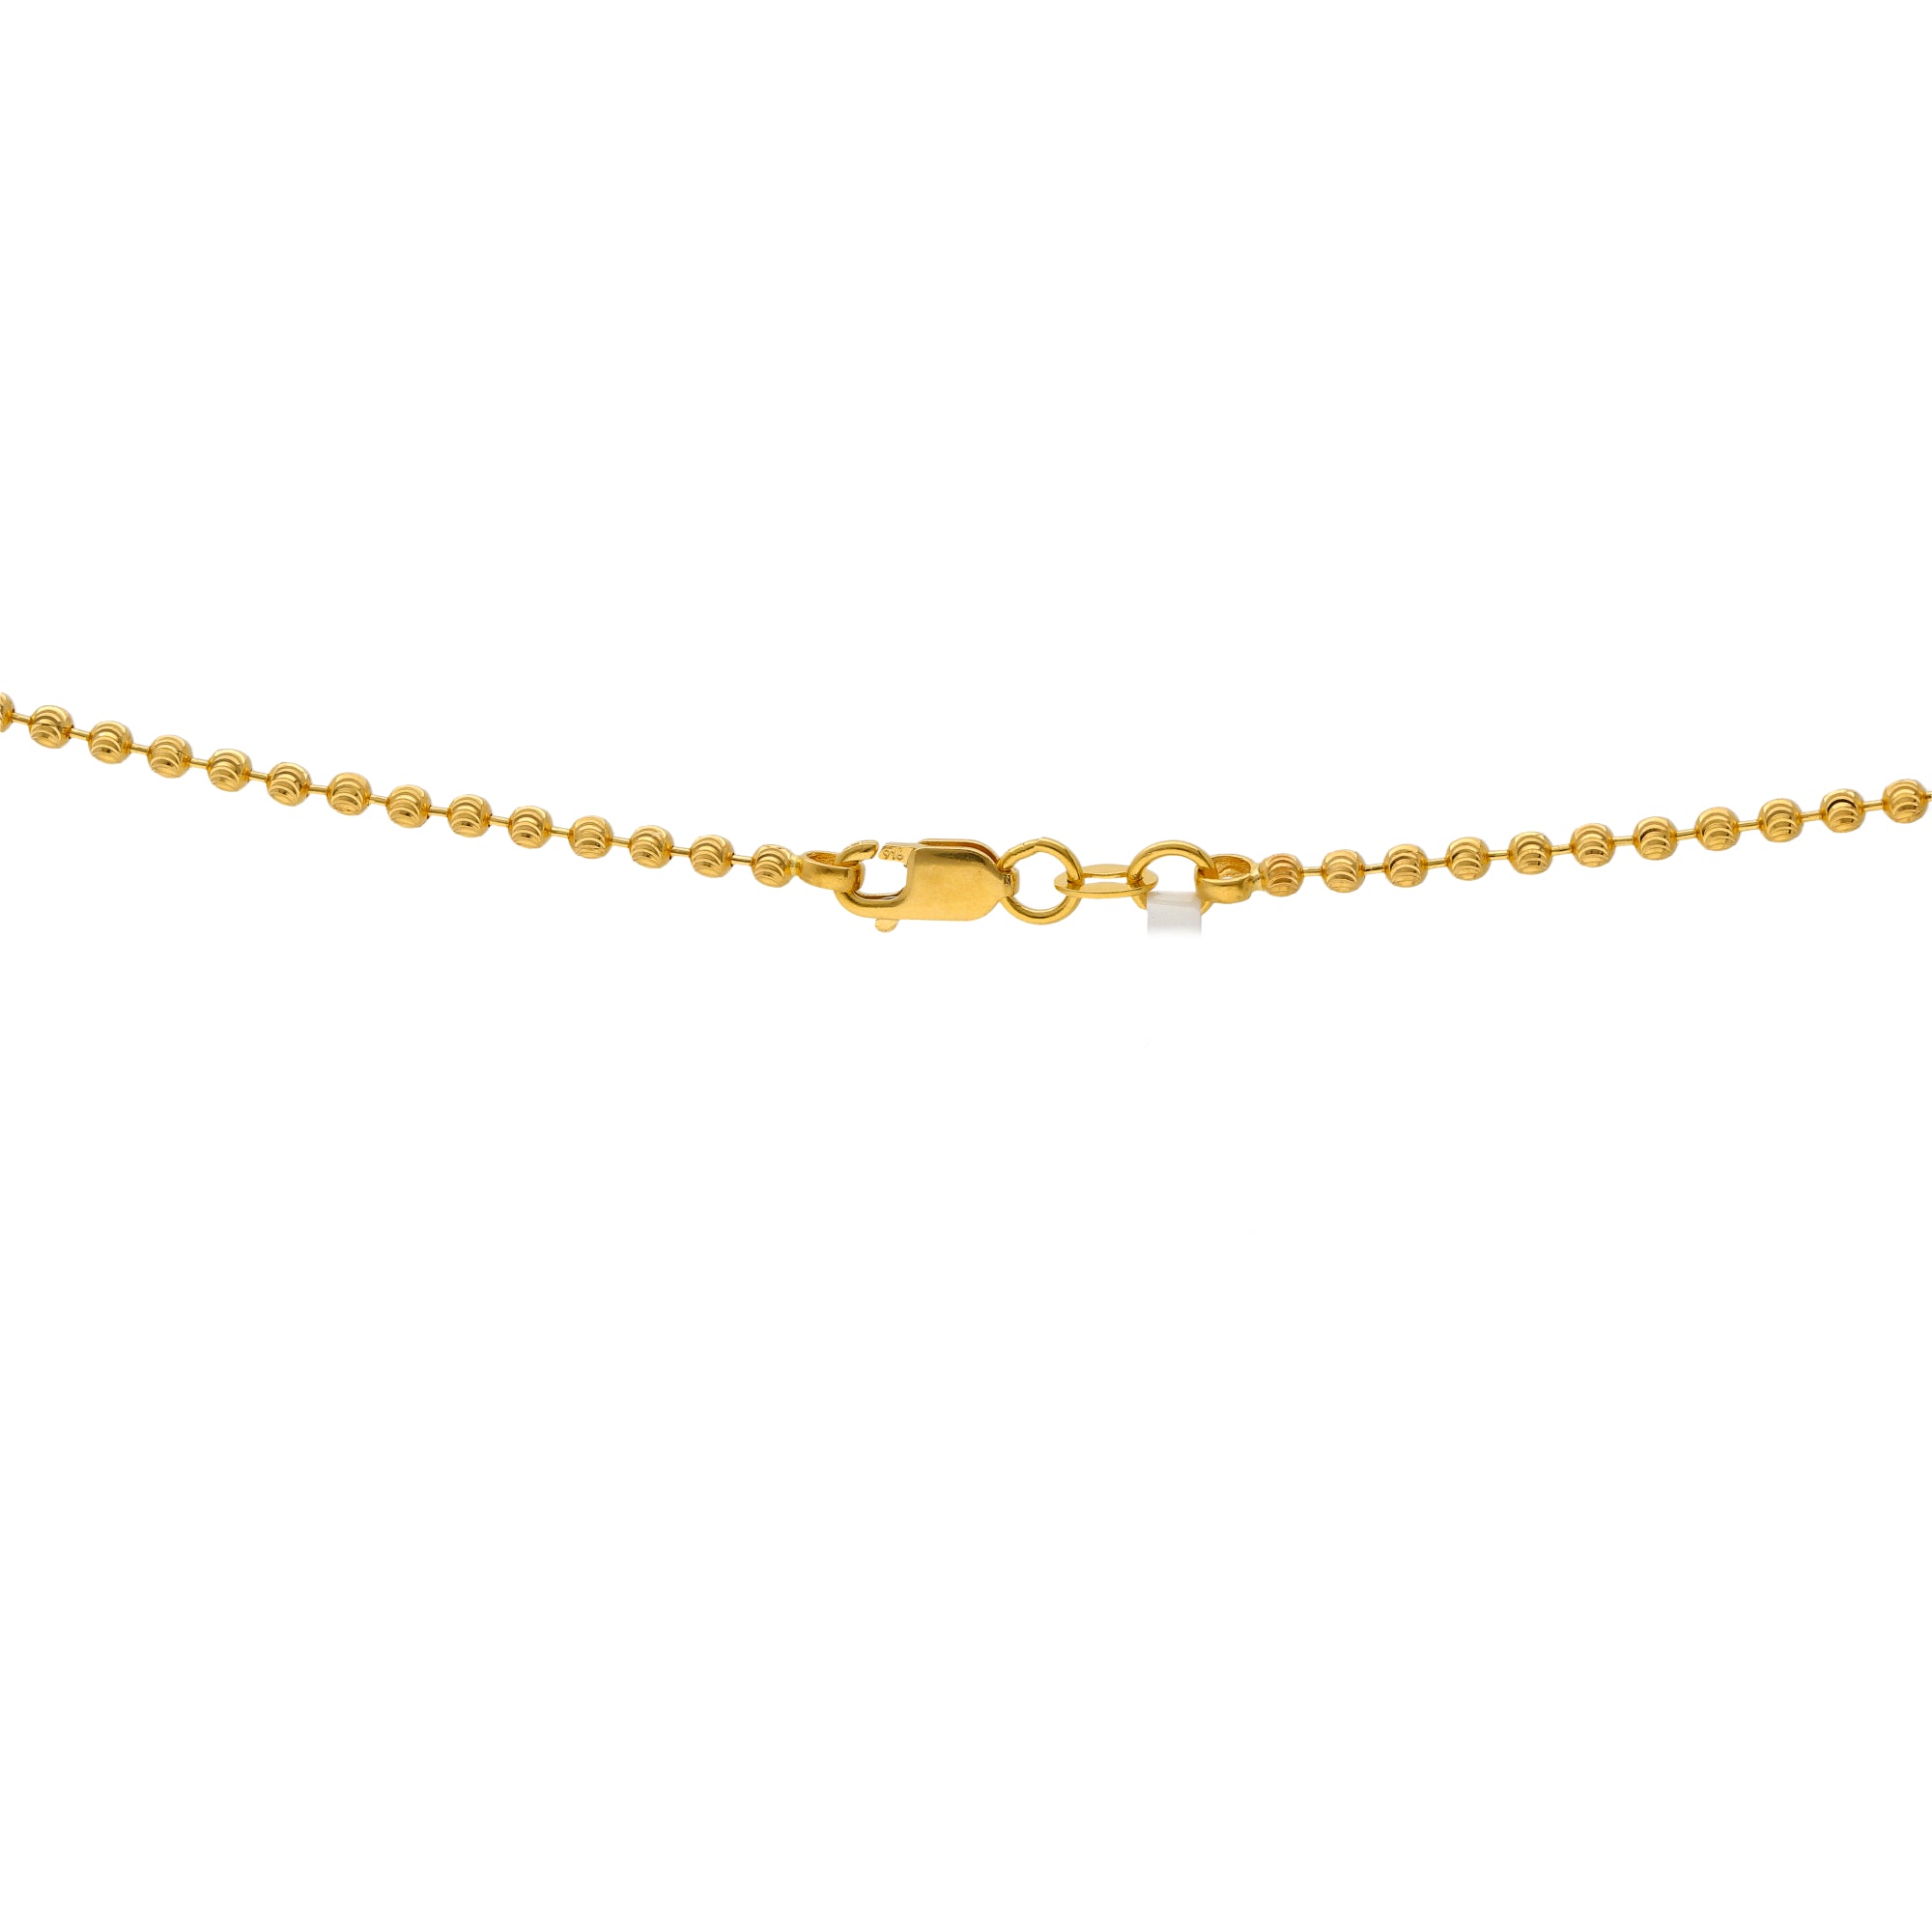 22K Yellow Gold 20in Beaded Chain (7.4 gms)